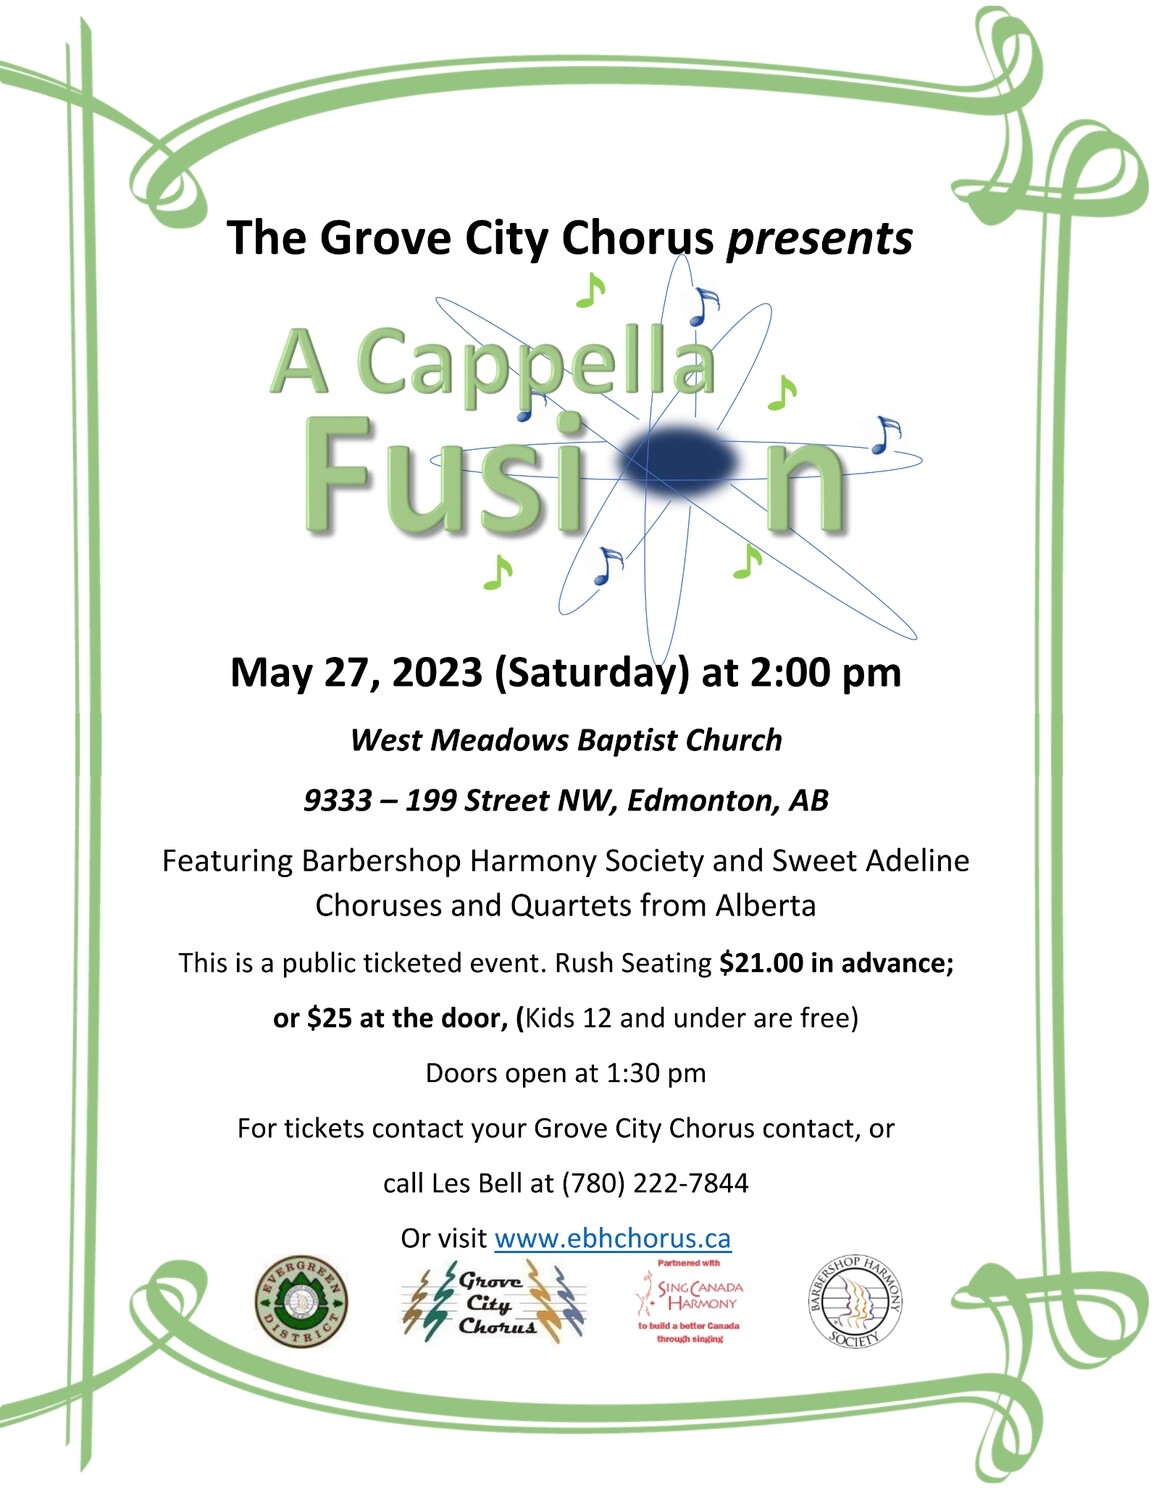 A Cappella Fusion Matinee Ticket (General Admission) for 2 pm, May 27, 2023 at West Meadows Baptist Church (9333-199st, Edmonton)